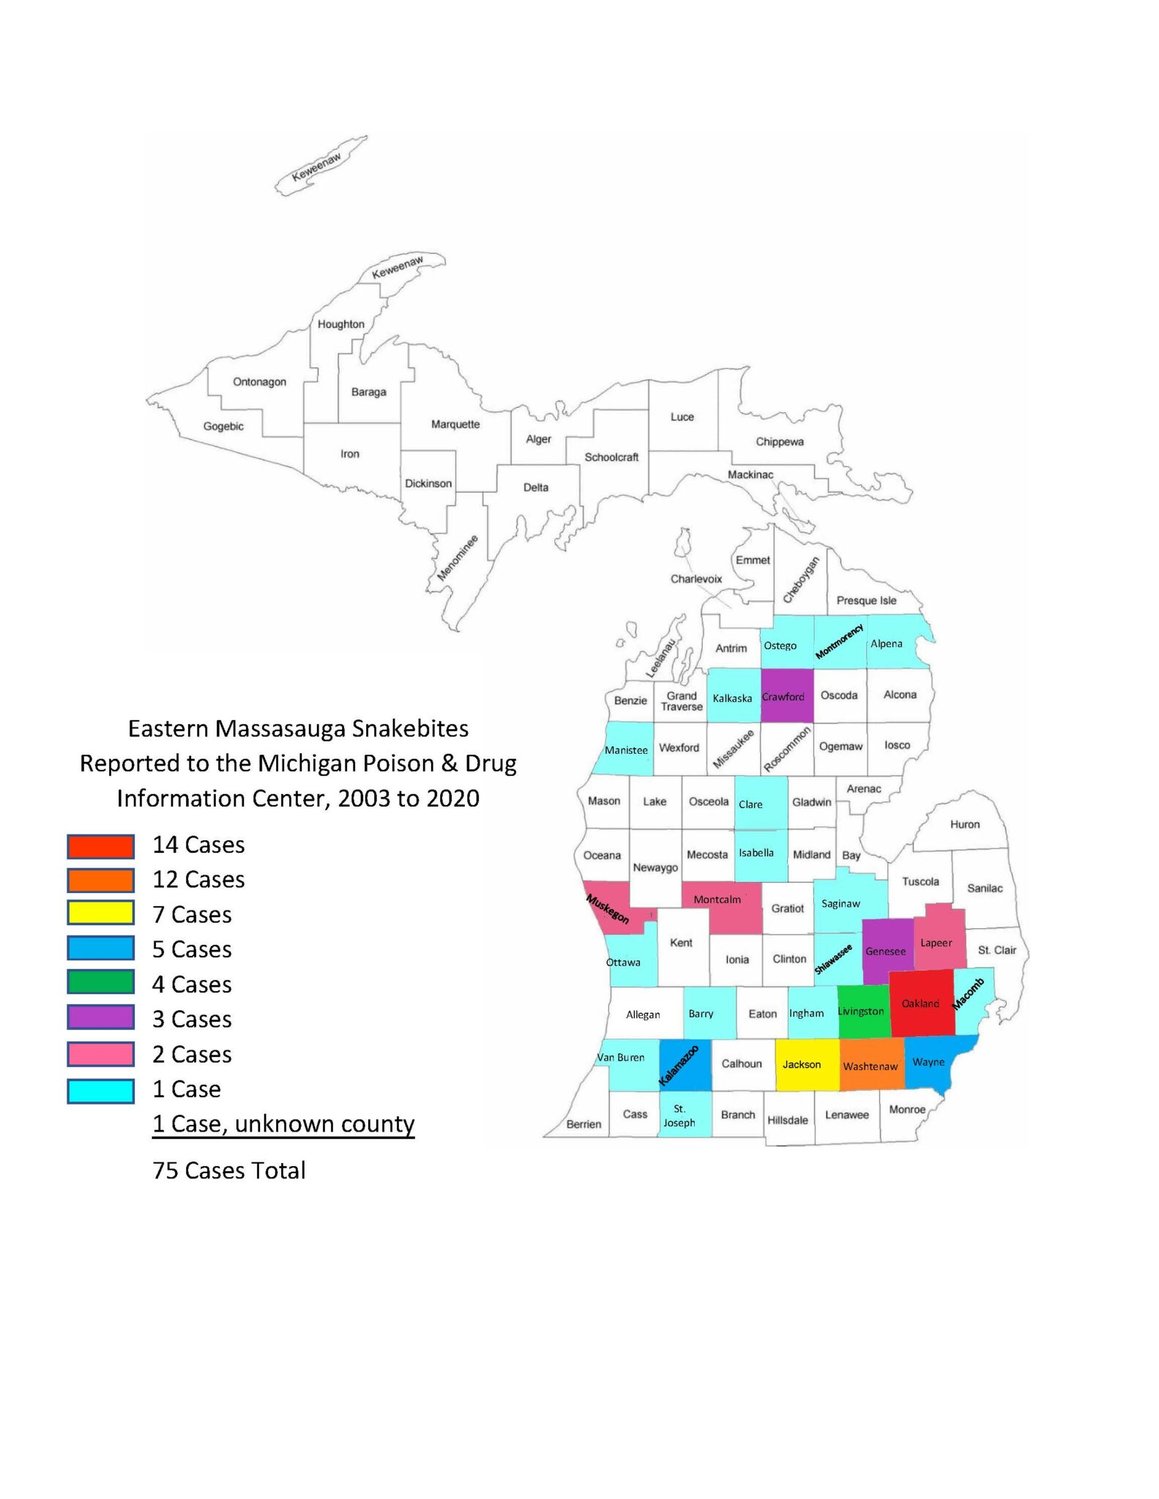 Counties where eastern massasauga rattlesnake bites were suspected or confirmed from 2003 through 2020.